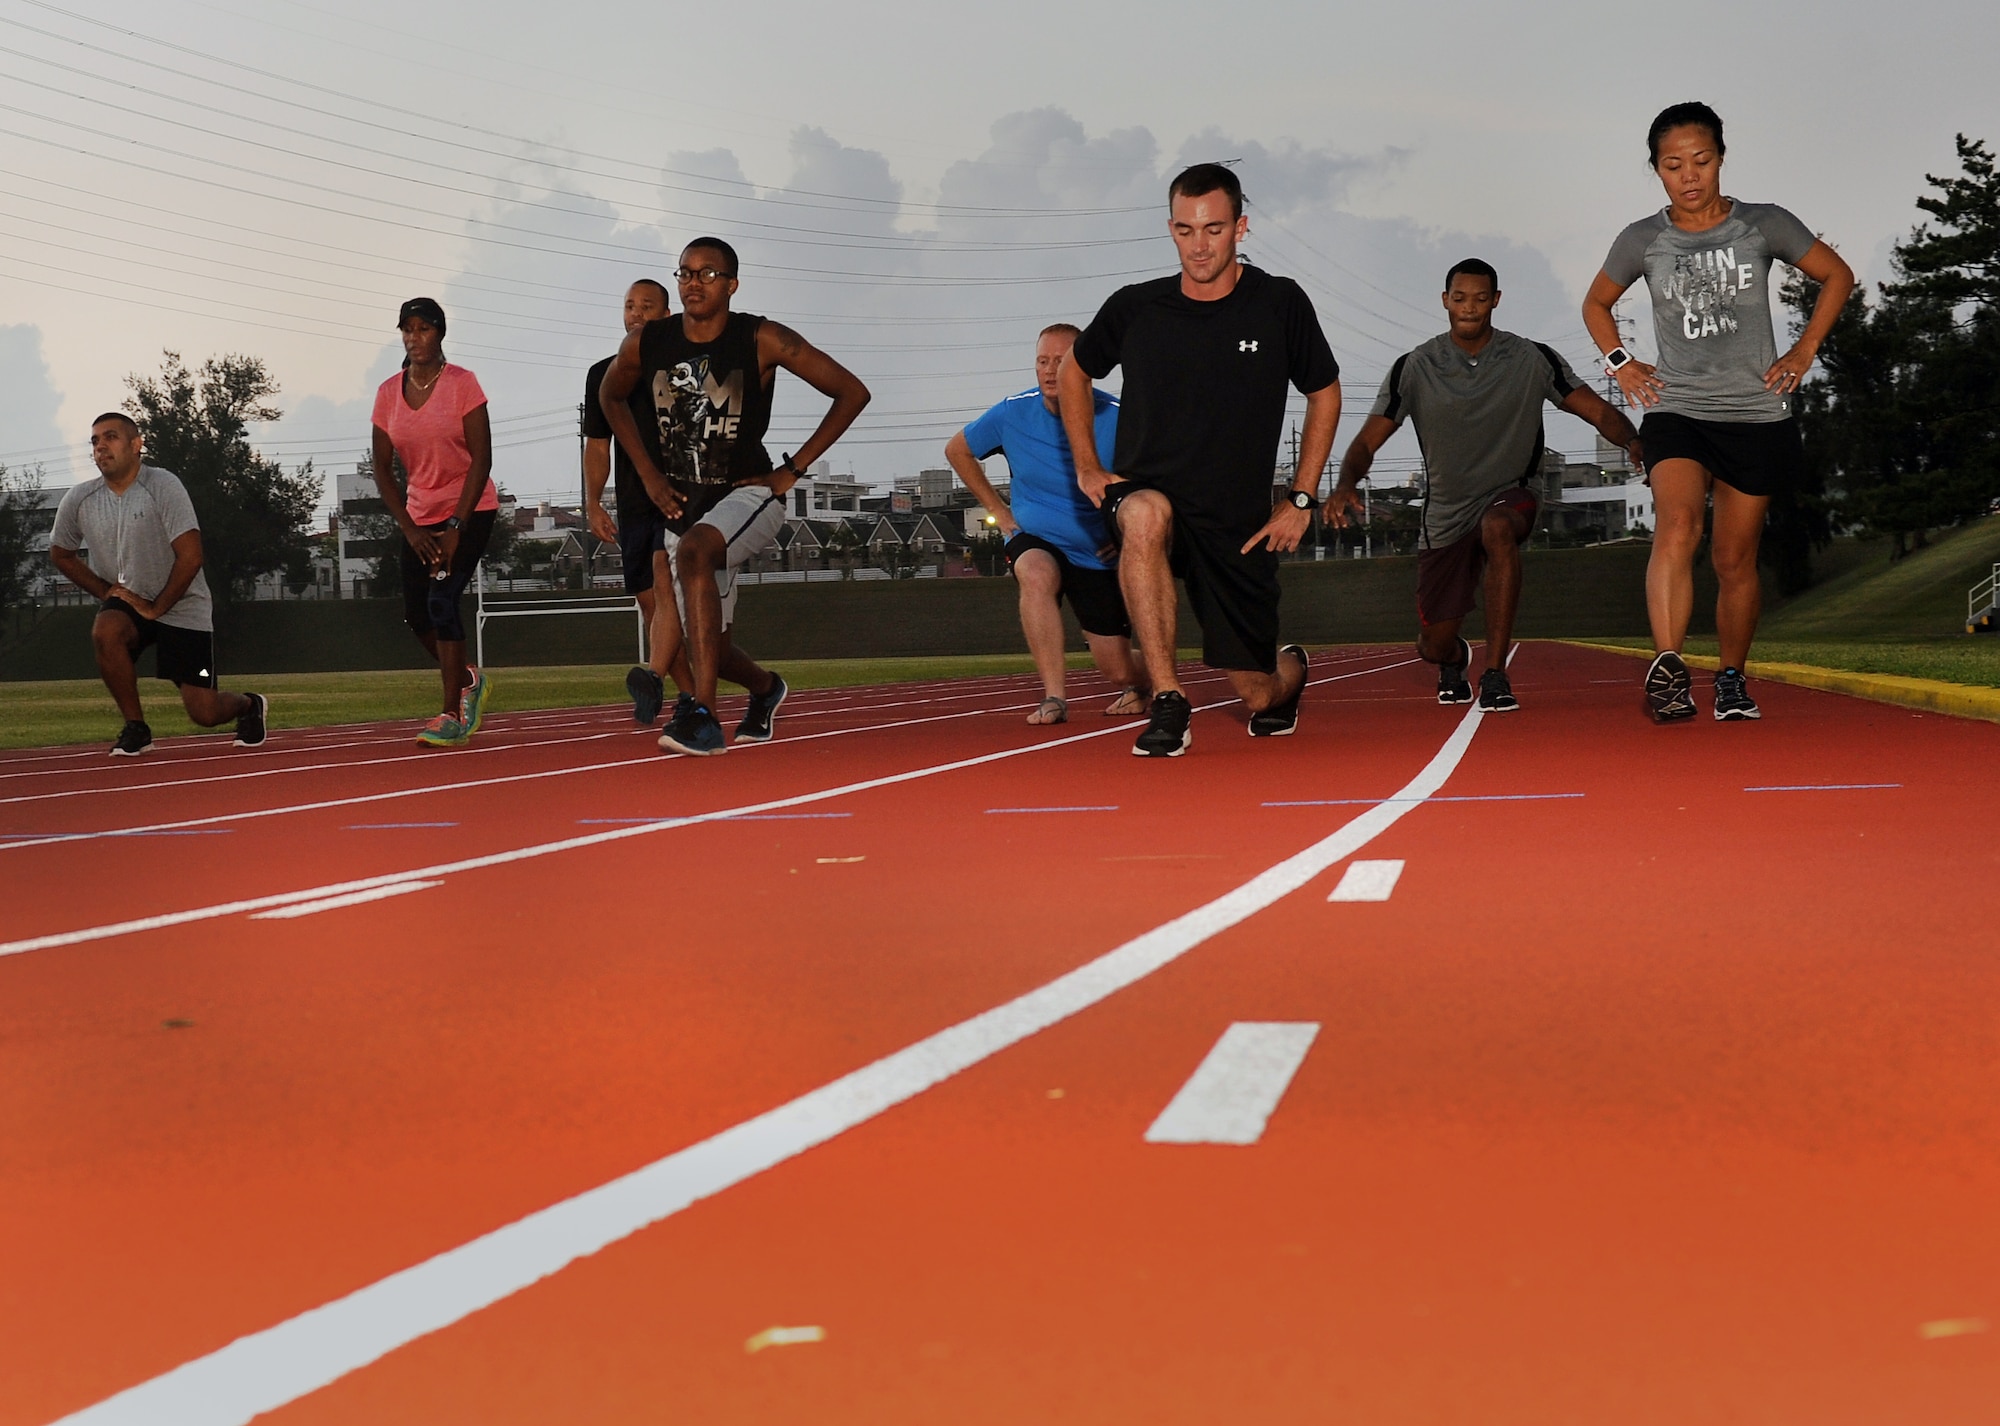 Participants in the first session of Kadena Air Base’s running improvement program perform lunges as a warm up exercise before beginning their cardiovascular workout at the Kadena High School track, Aug. 5, 2015. The running improvement program is an eight-week program designed by a certified natural running coach that aims to improve participants’ run times while educating them on proper form. (U.S. Air Force photo by Airman 1st Class Zade C. Vadnais)